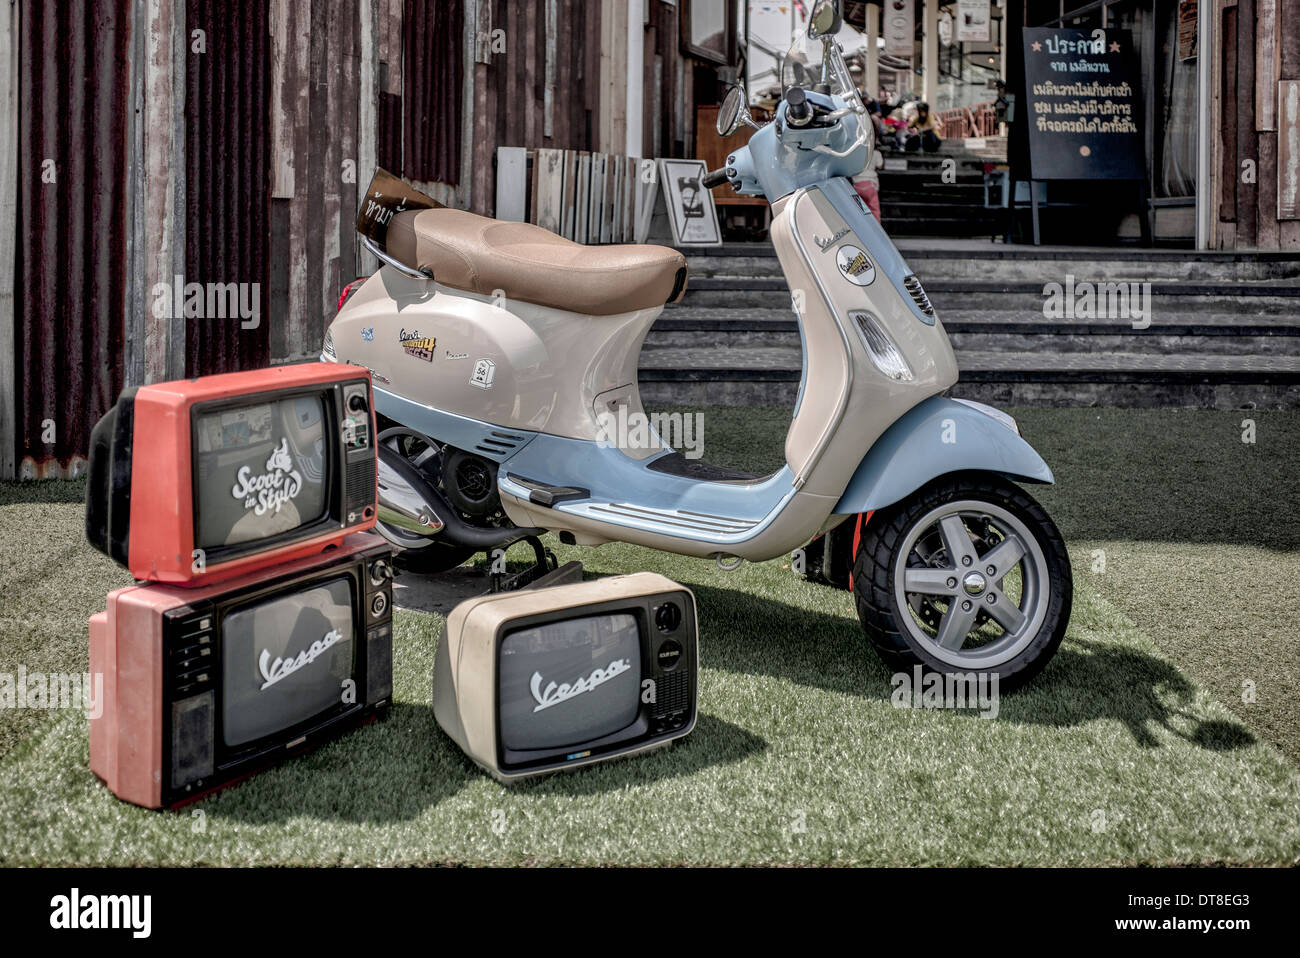 Vespa LX 125 scooter on display with vintage 60's style TV sets as an  advertising prop Stock Photo - Alamy